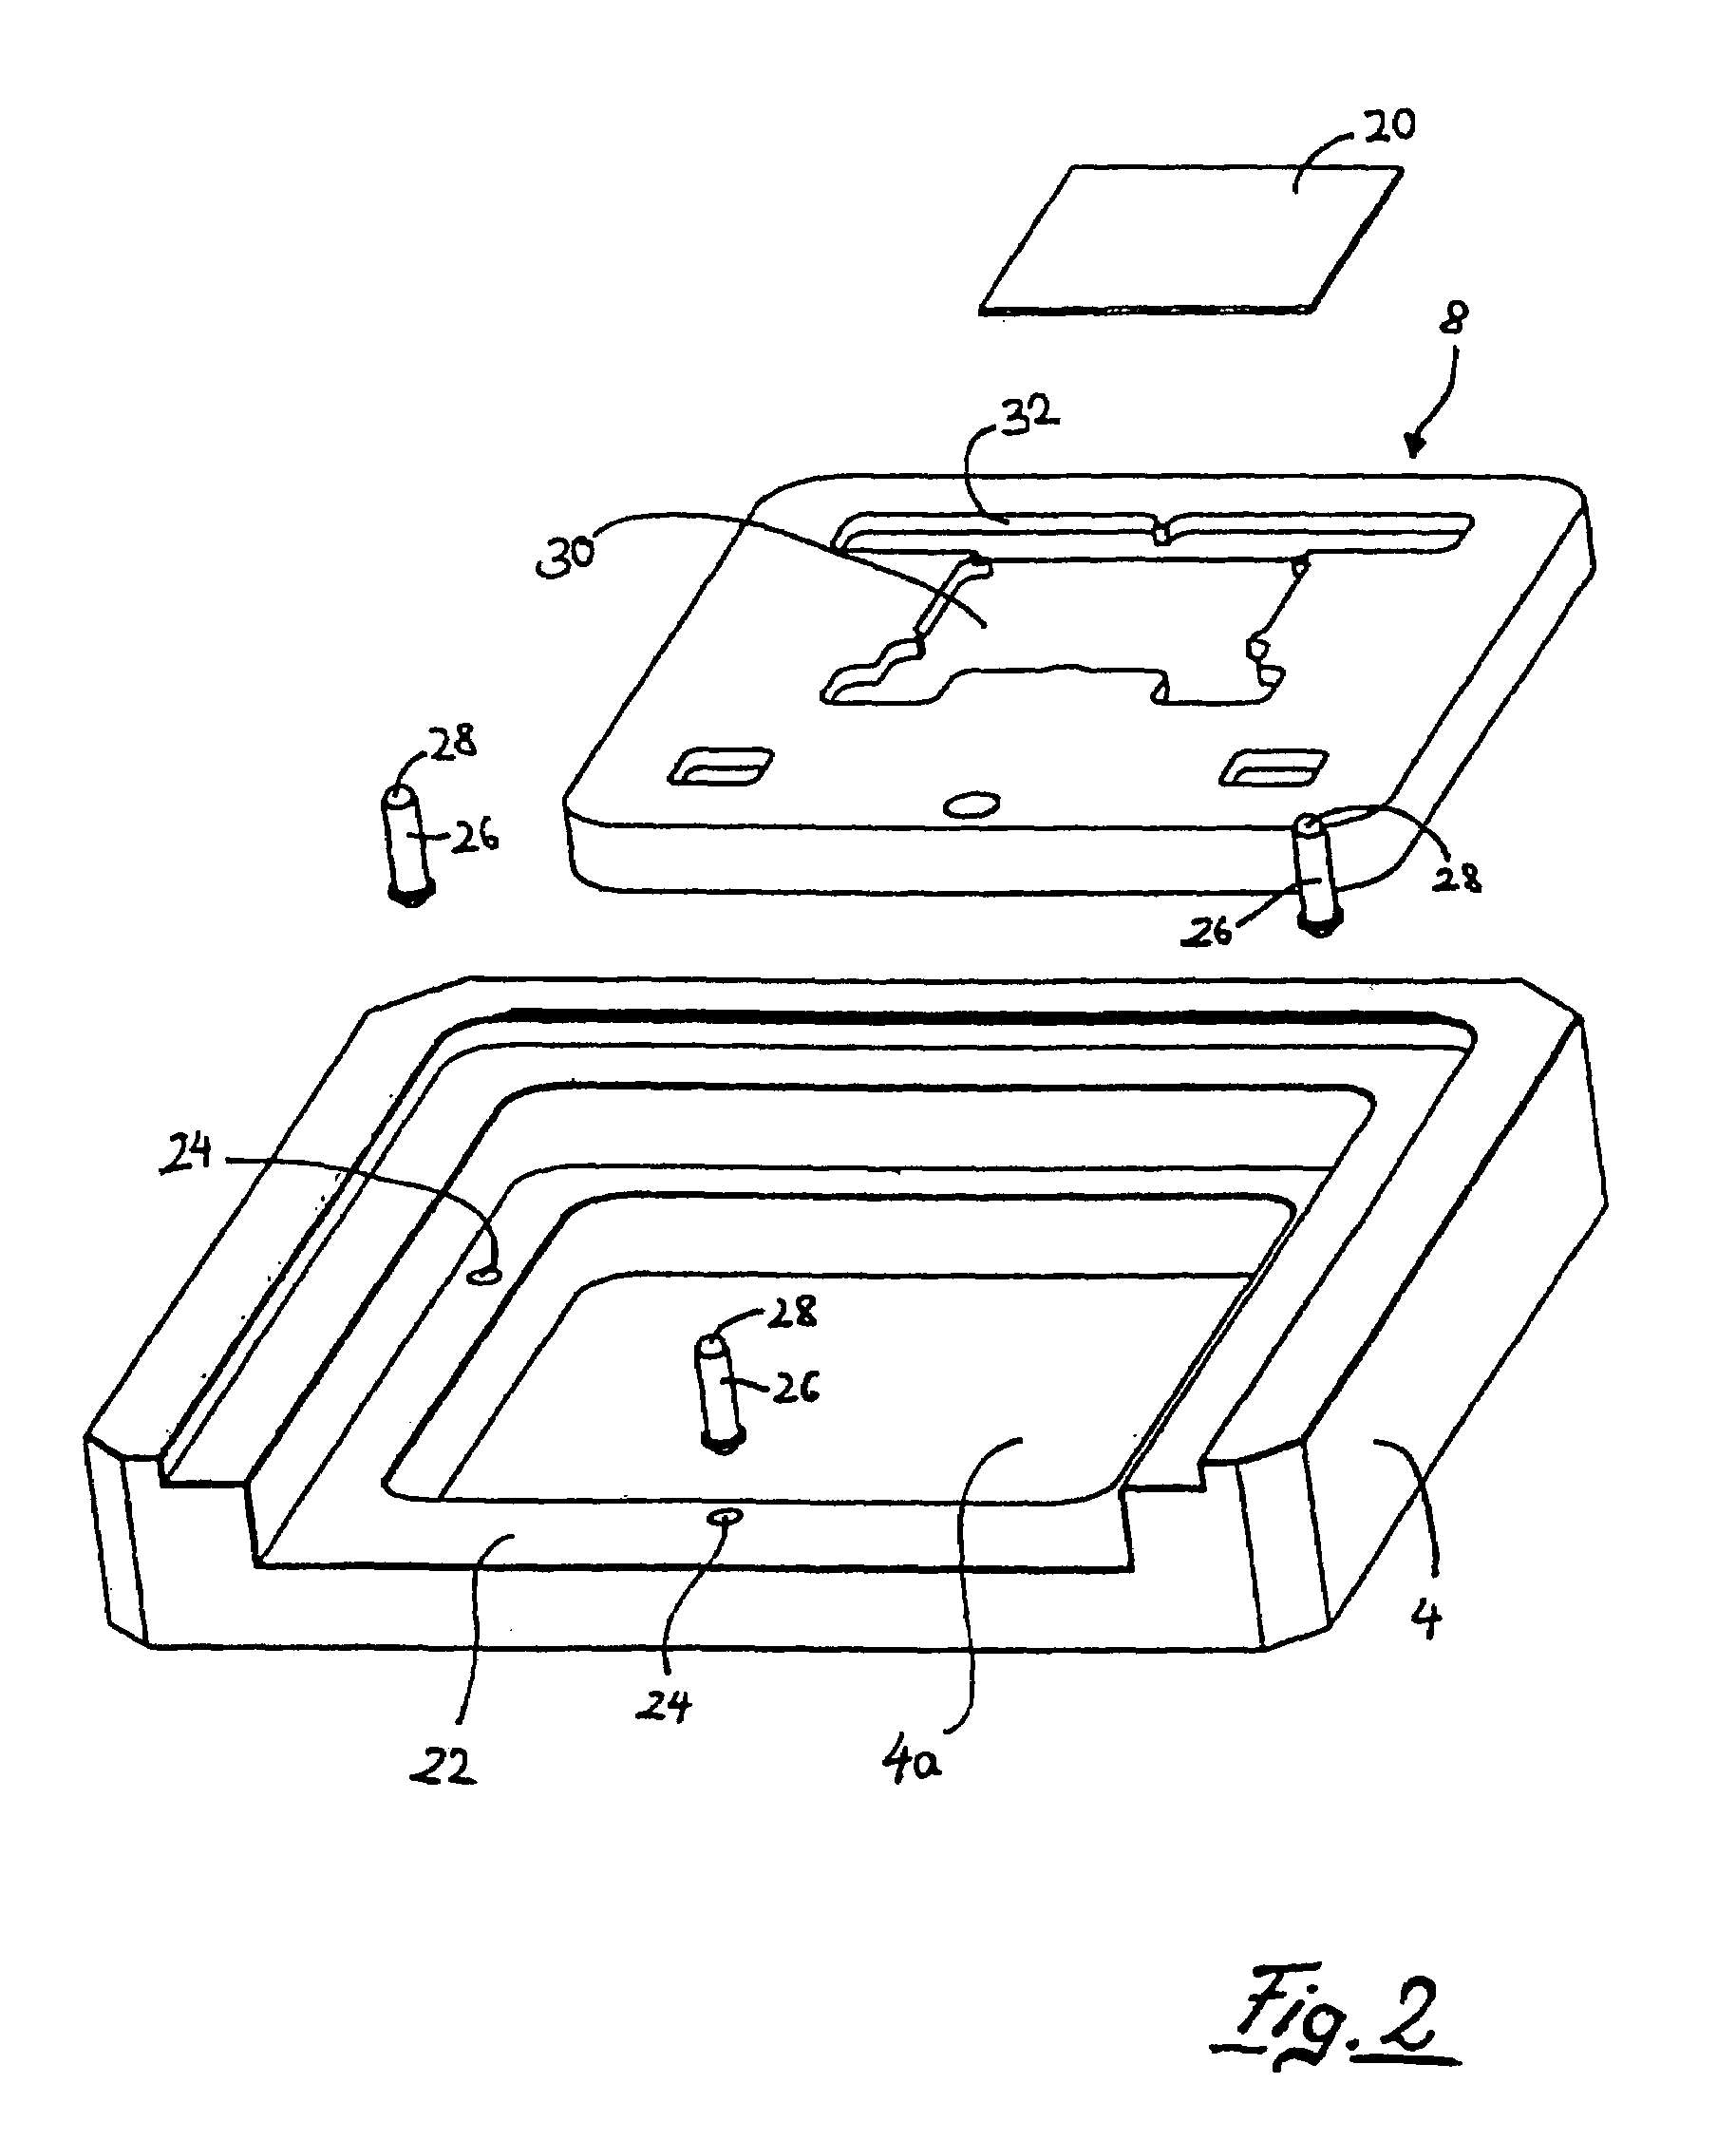 Substrate holder, and use of the substrate holder in a highly accurate measuring instrument